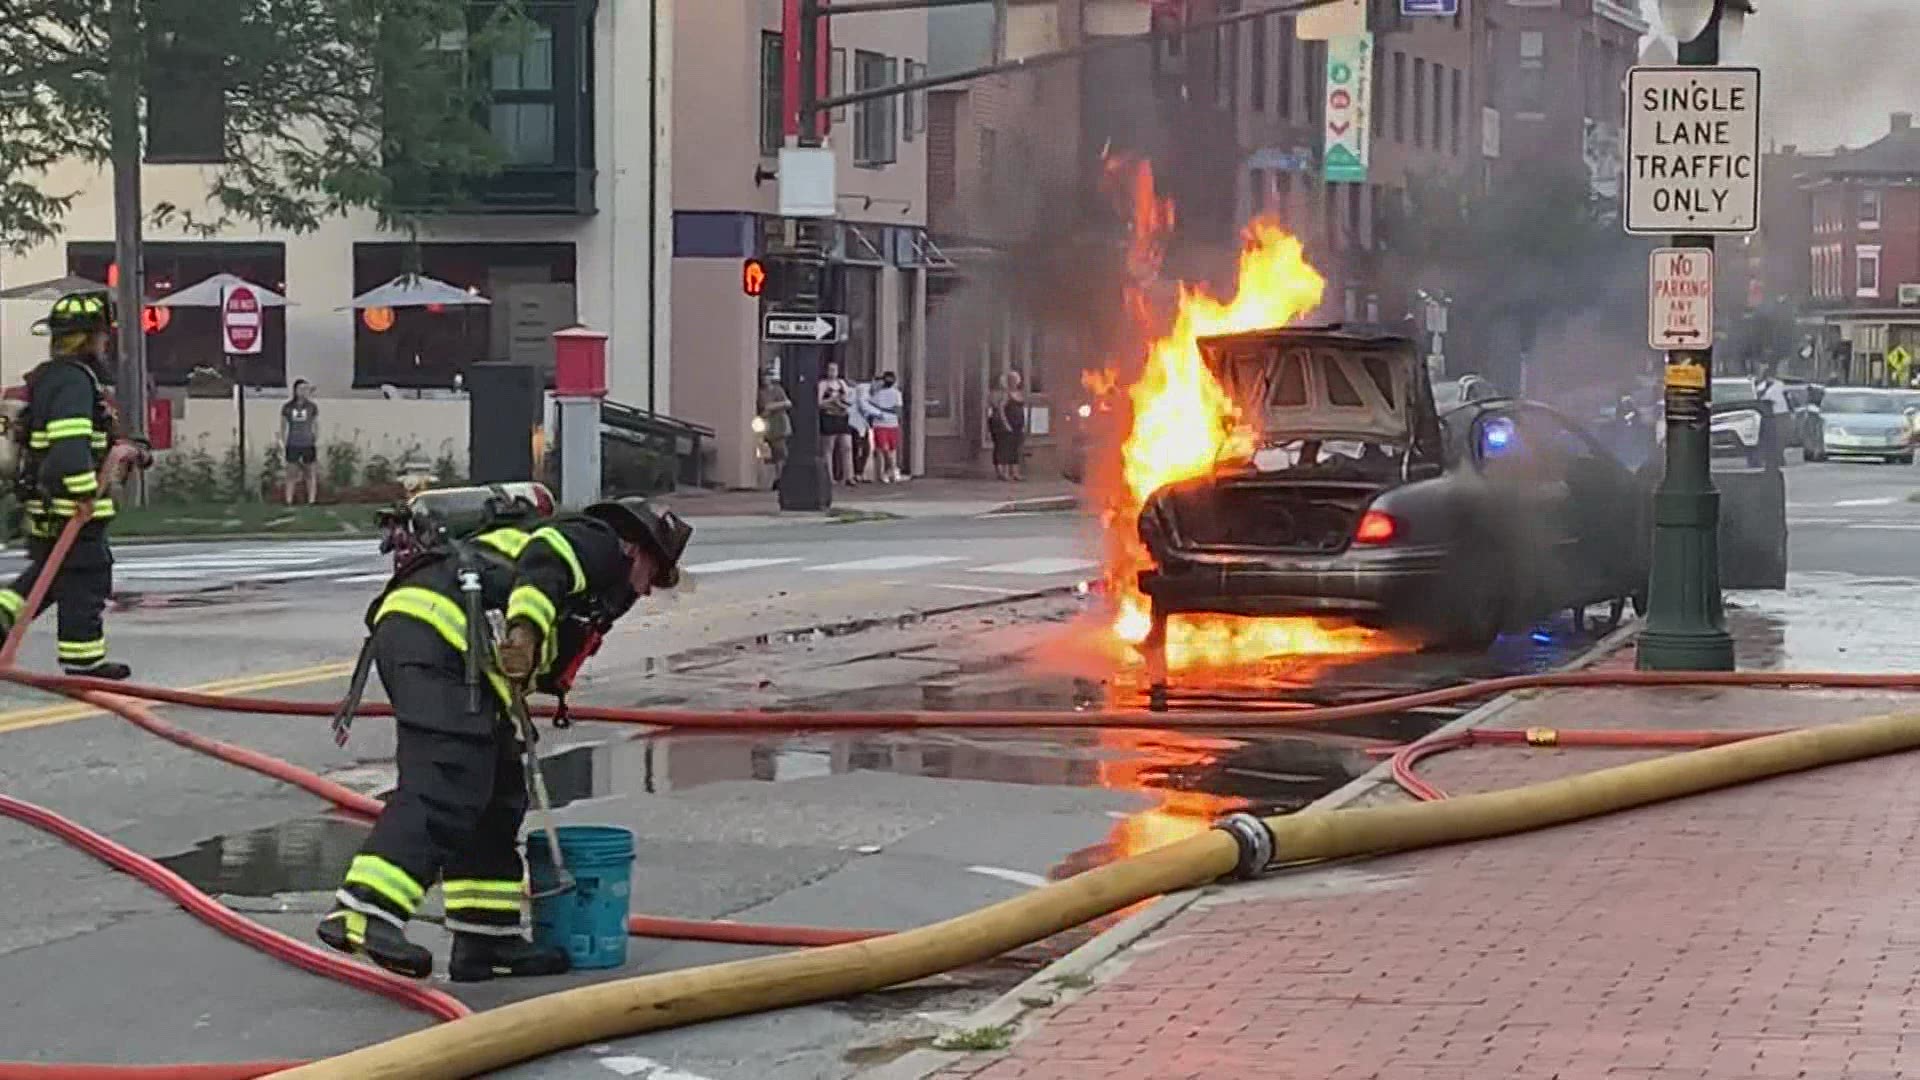 A car goes up in flames, moments after the occupants get out.